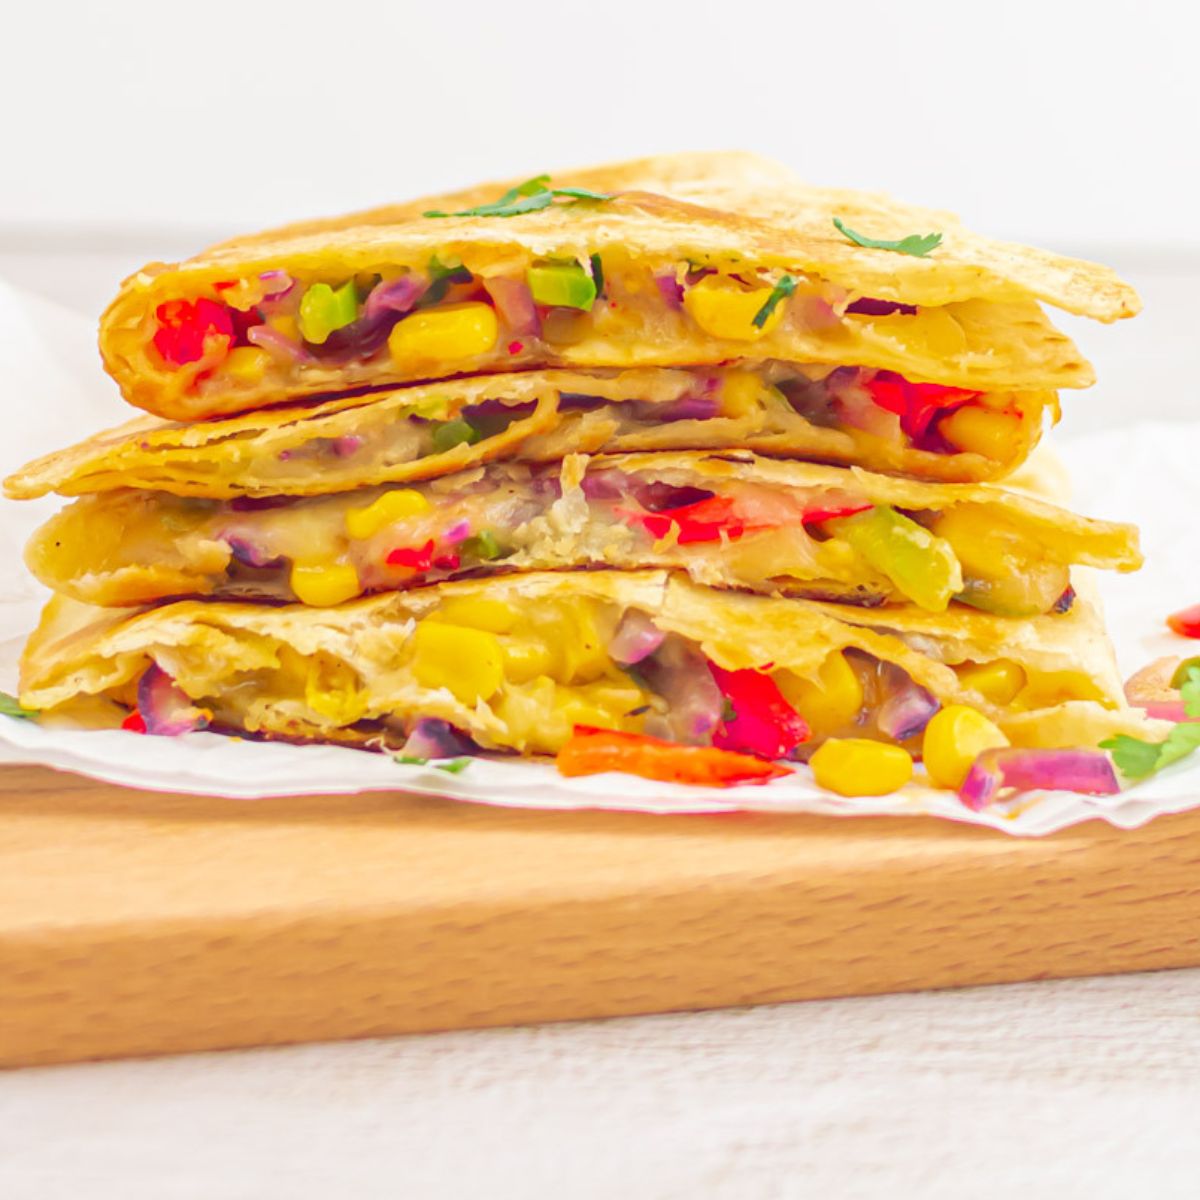 vegetable quesadillas stacked on a baking paper on a wooden board.